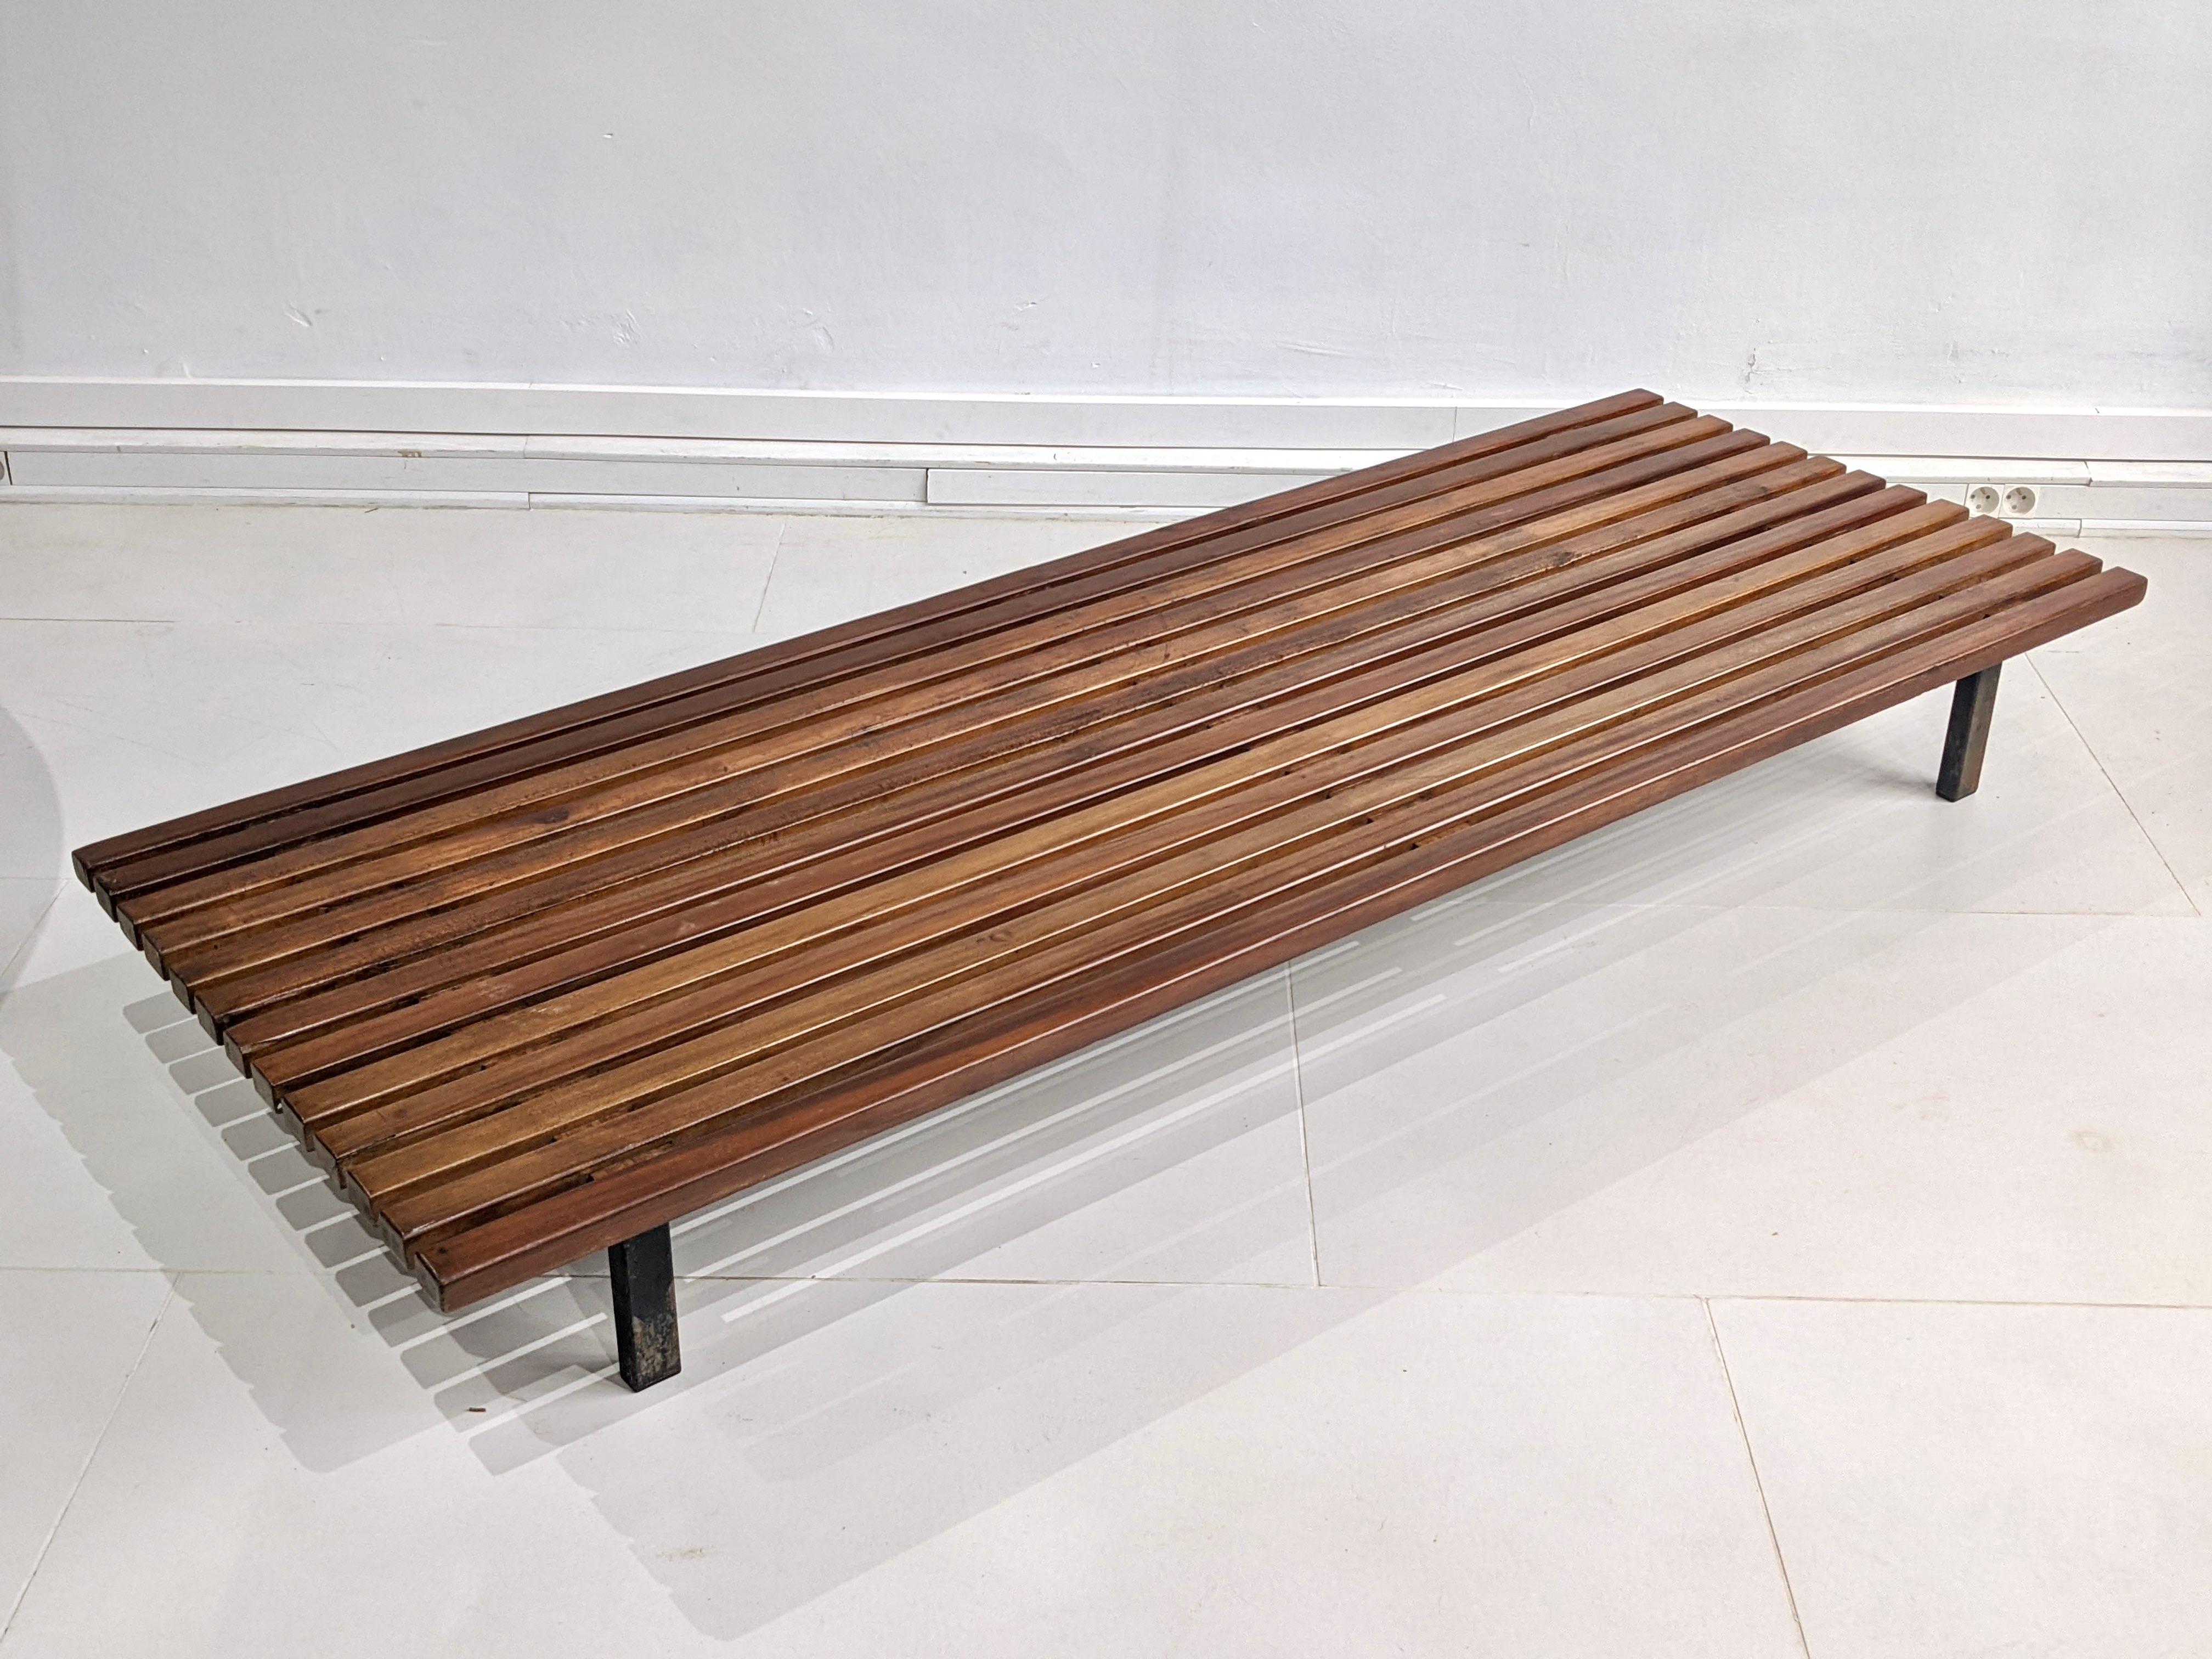 Cansado bench sofa 13 slats by Charlotte Perriand.

Year 1954. In mahogany wood.
Steph Simon edition. Very good condition. 
Seat and back in grey fabric. They are not original. 
The bench has been varnished. Some small defects on the wood (see